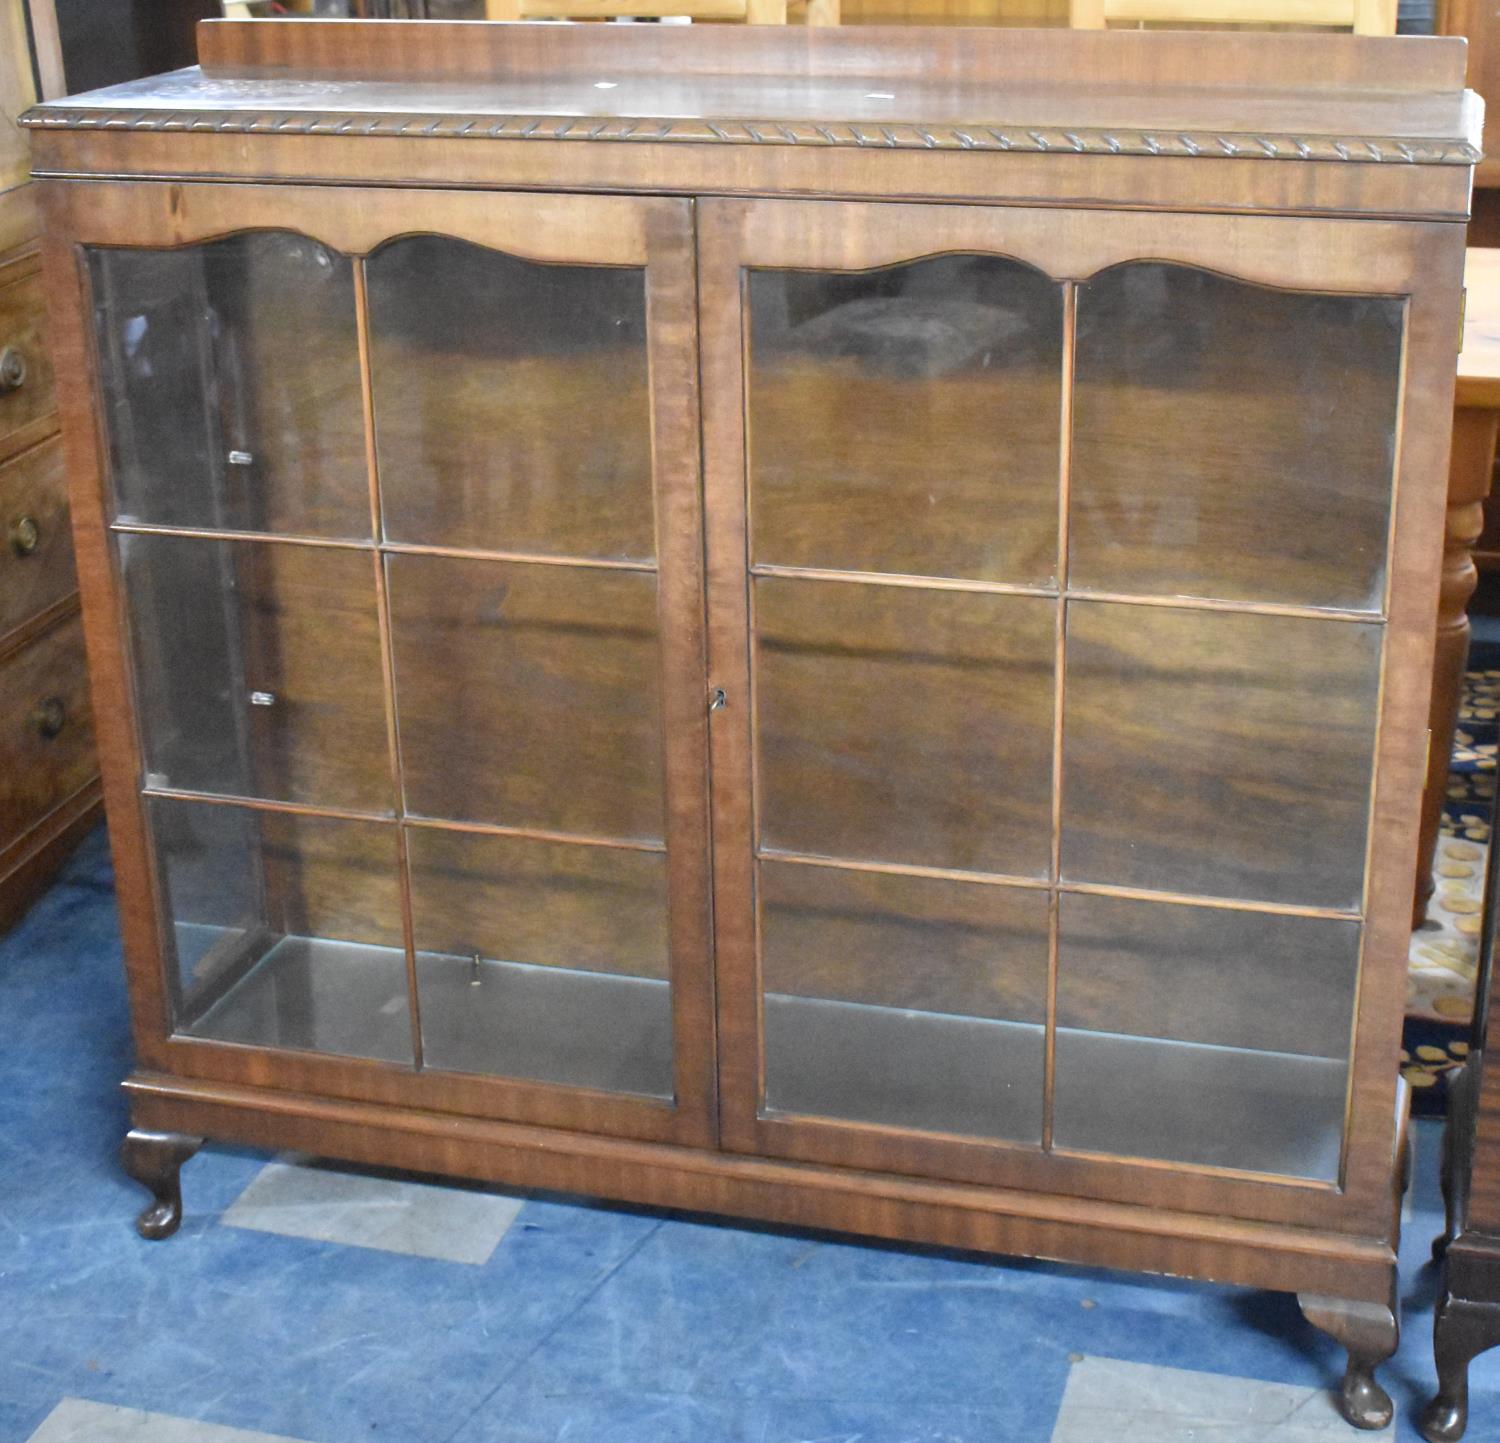 An Edwardian Galleried Mahogany Glazed Bookcase with Two Inner Glass Shelves